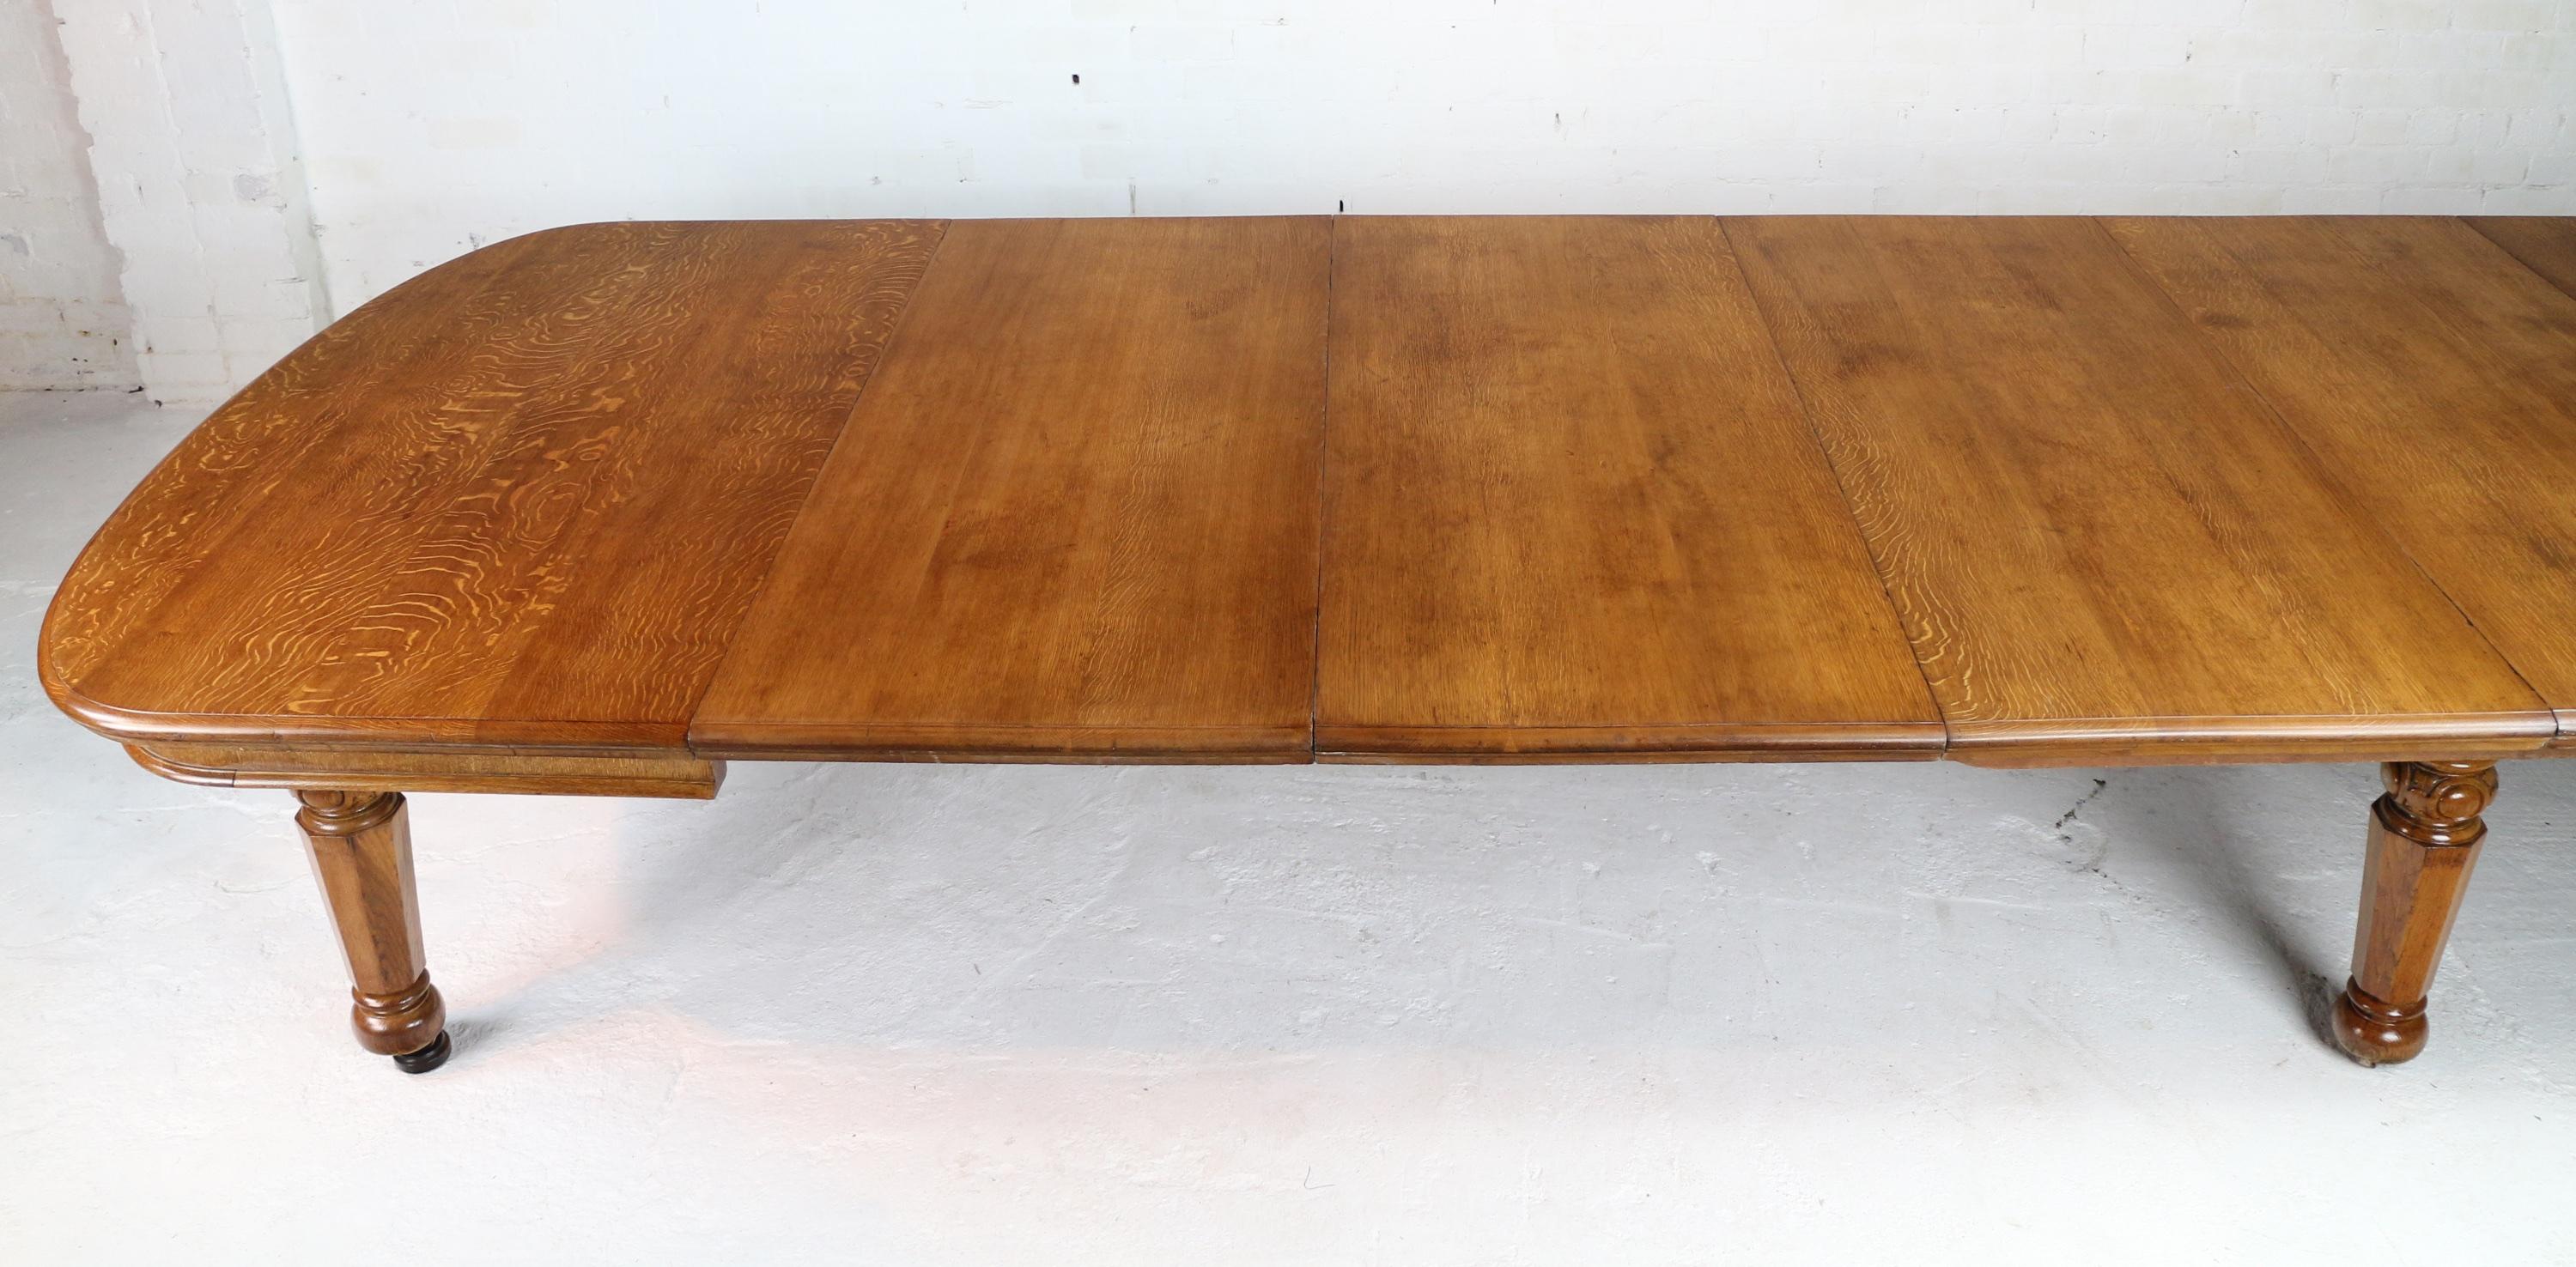 Brass Early Victorian Extra Wide Oak Extending Dining Table and 7 Leaves